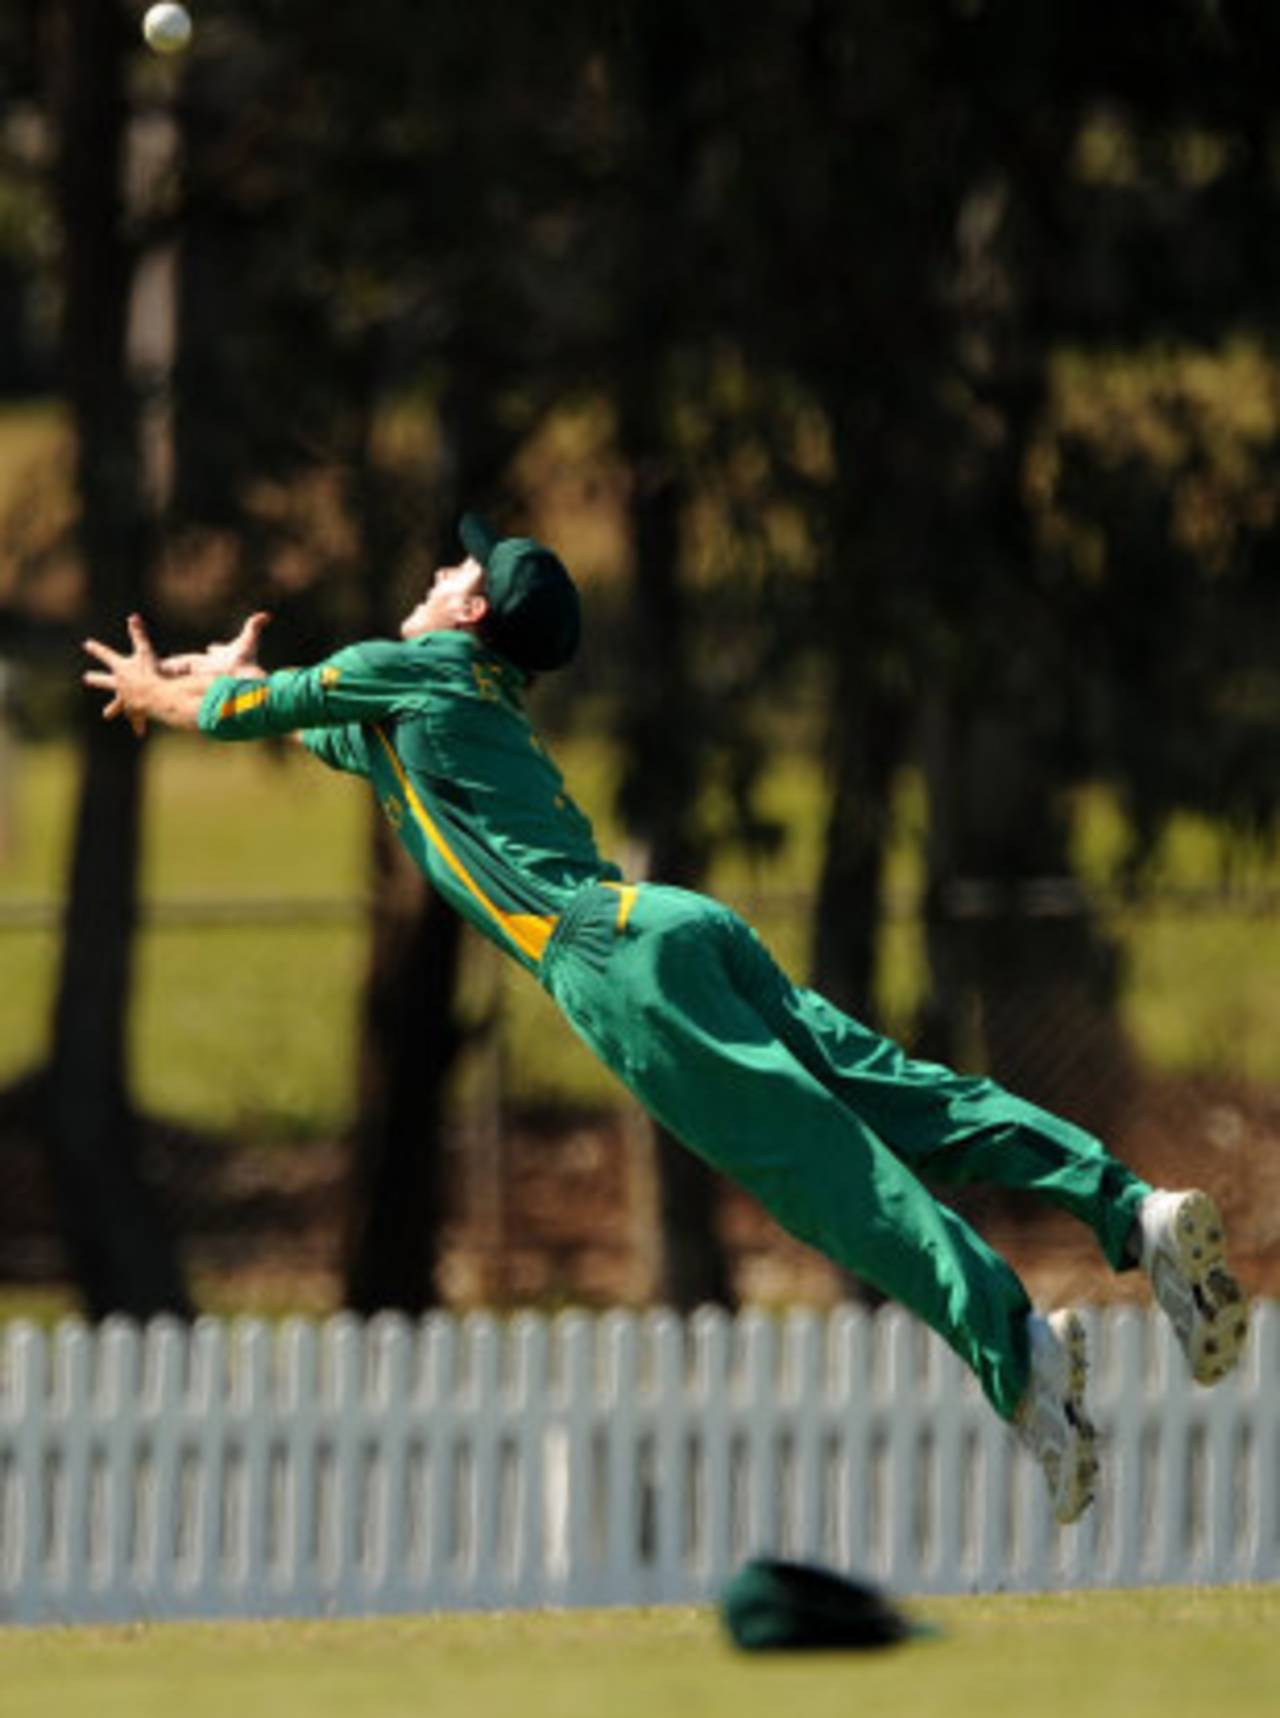 South Africa captain Chad Bowes puts in an acrobatic fielding effort, Sri Lanka v South Africa, Group D, ICC Under-19 World Cup 2012, Brisbane, August 15, 2012